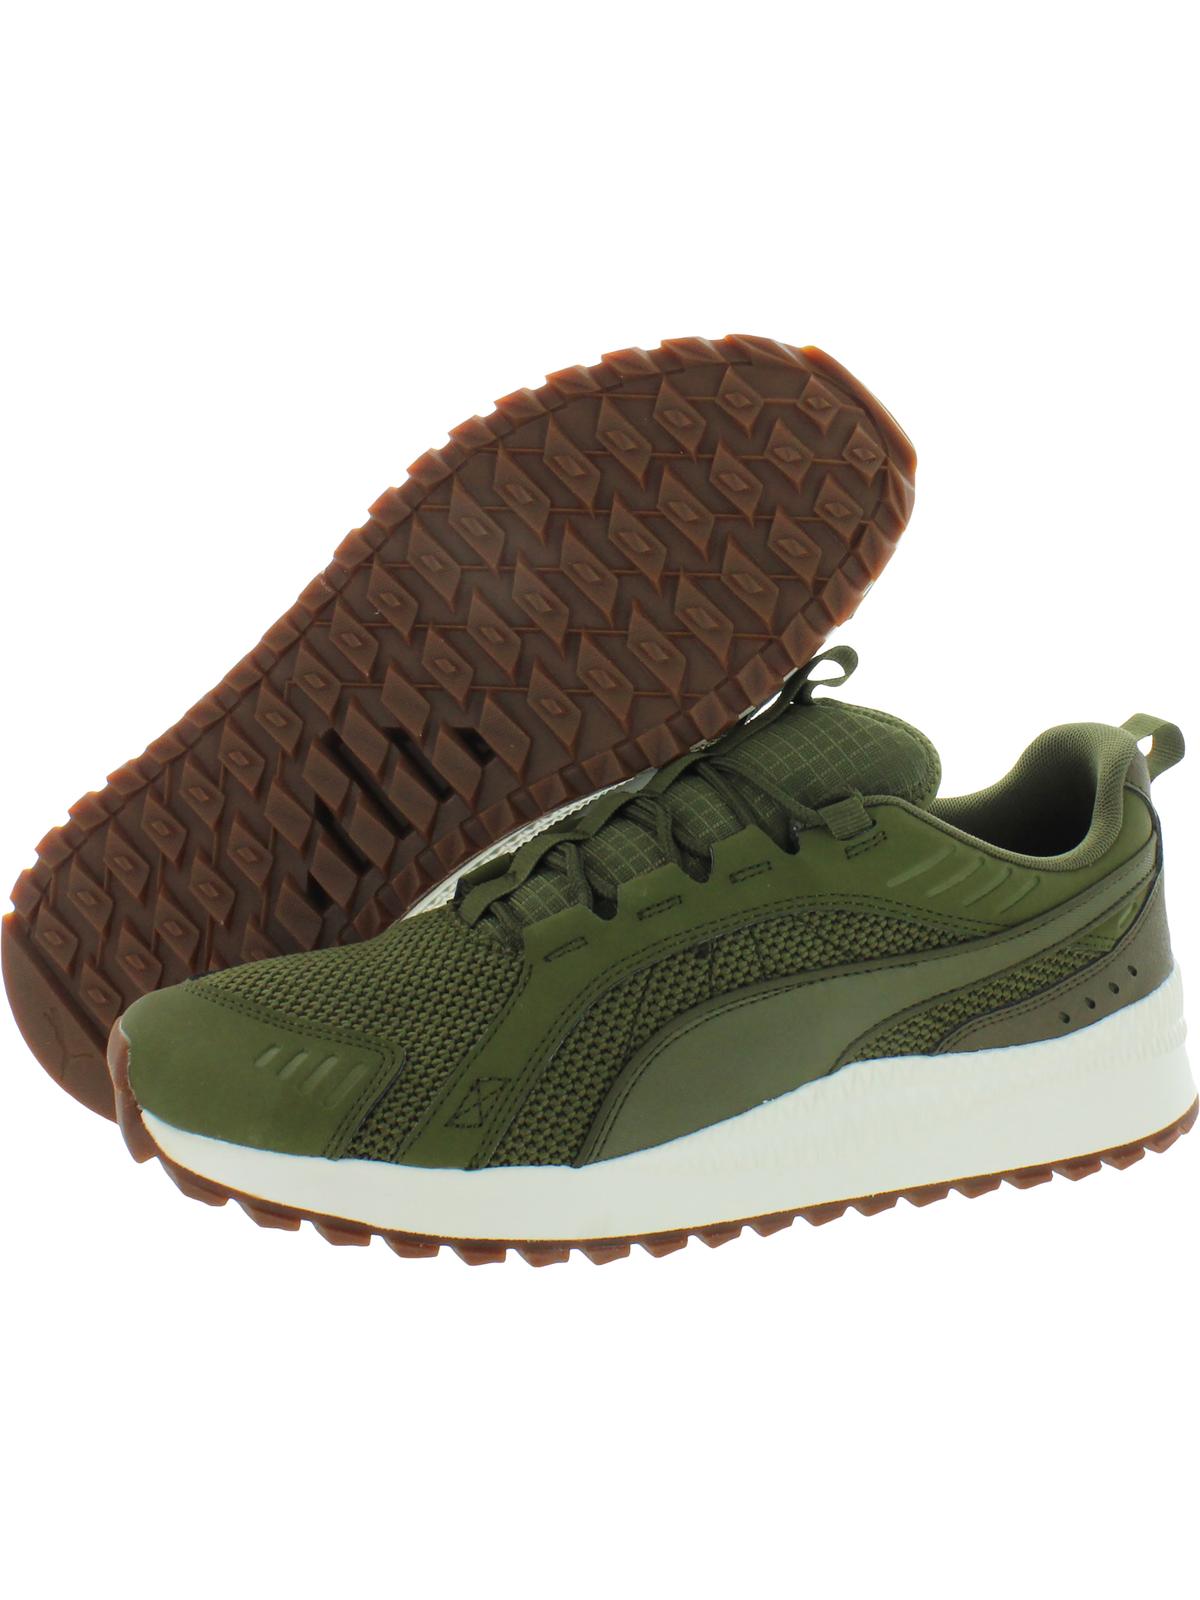 Puma Mens Pacer Next R Fitness Workout Athletic Shoes Green 11.5 Medium (D) - image 2 of 2